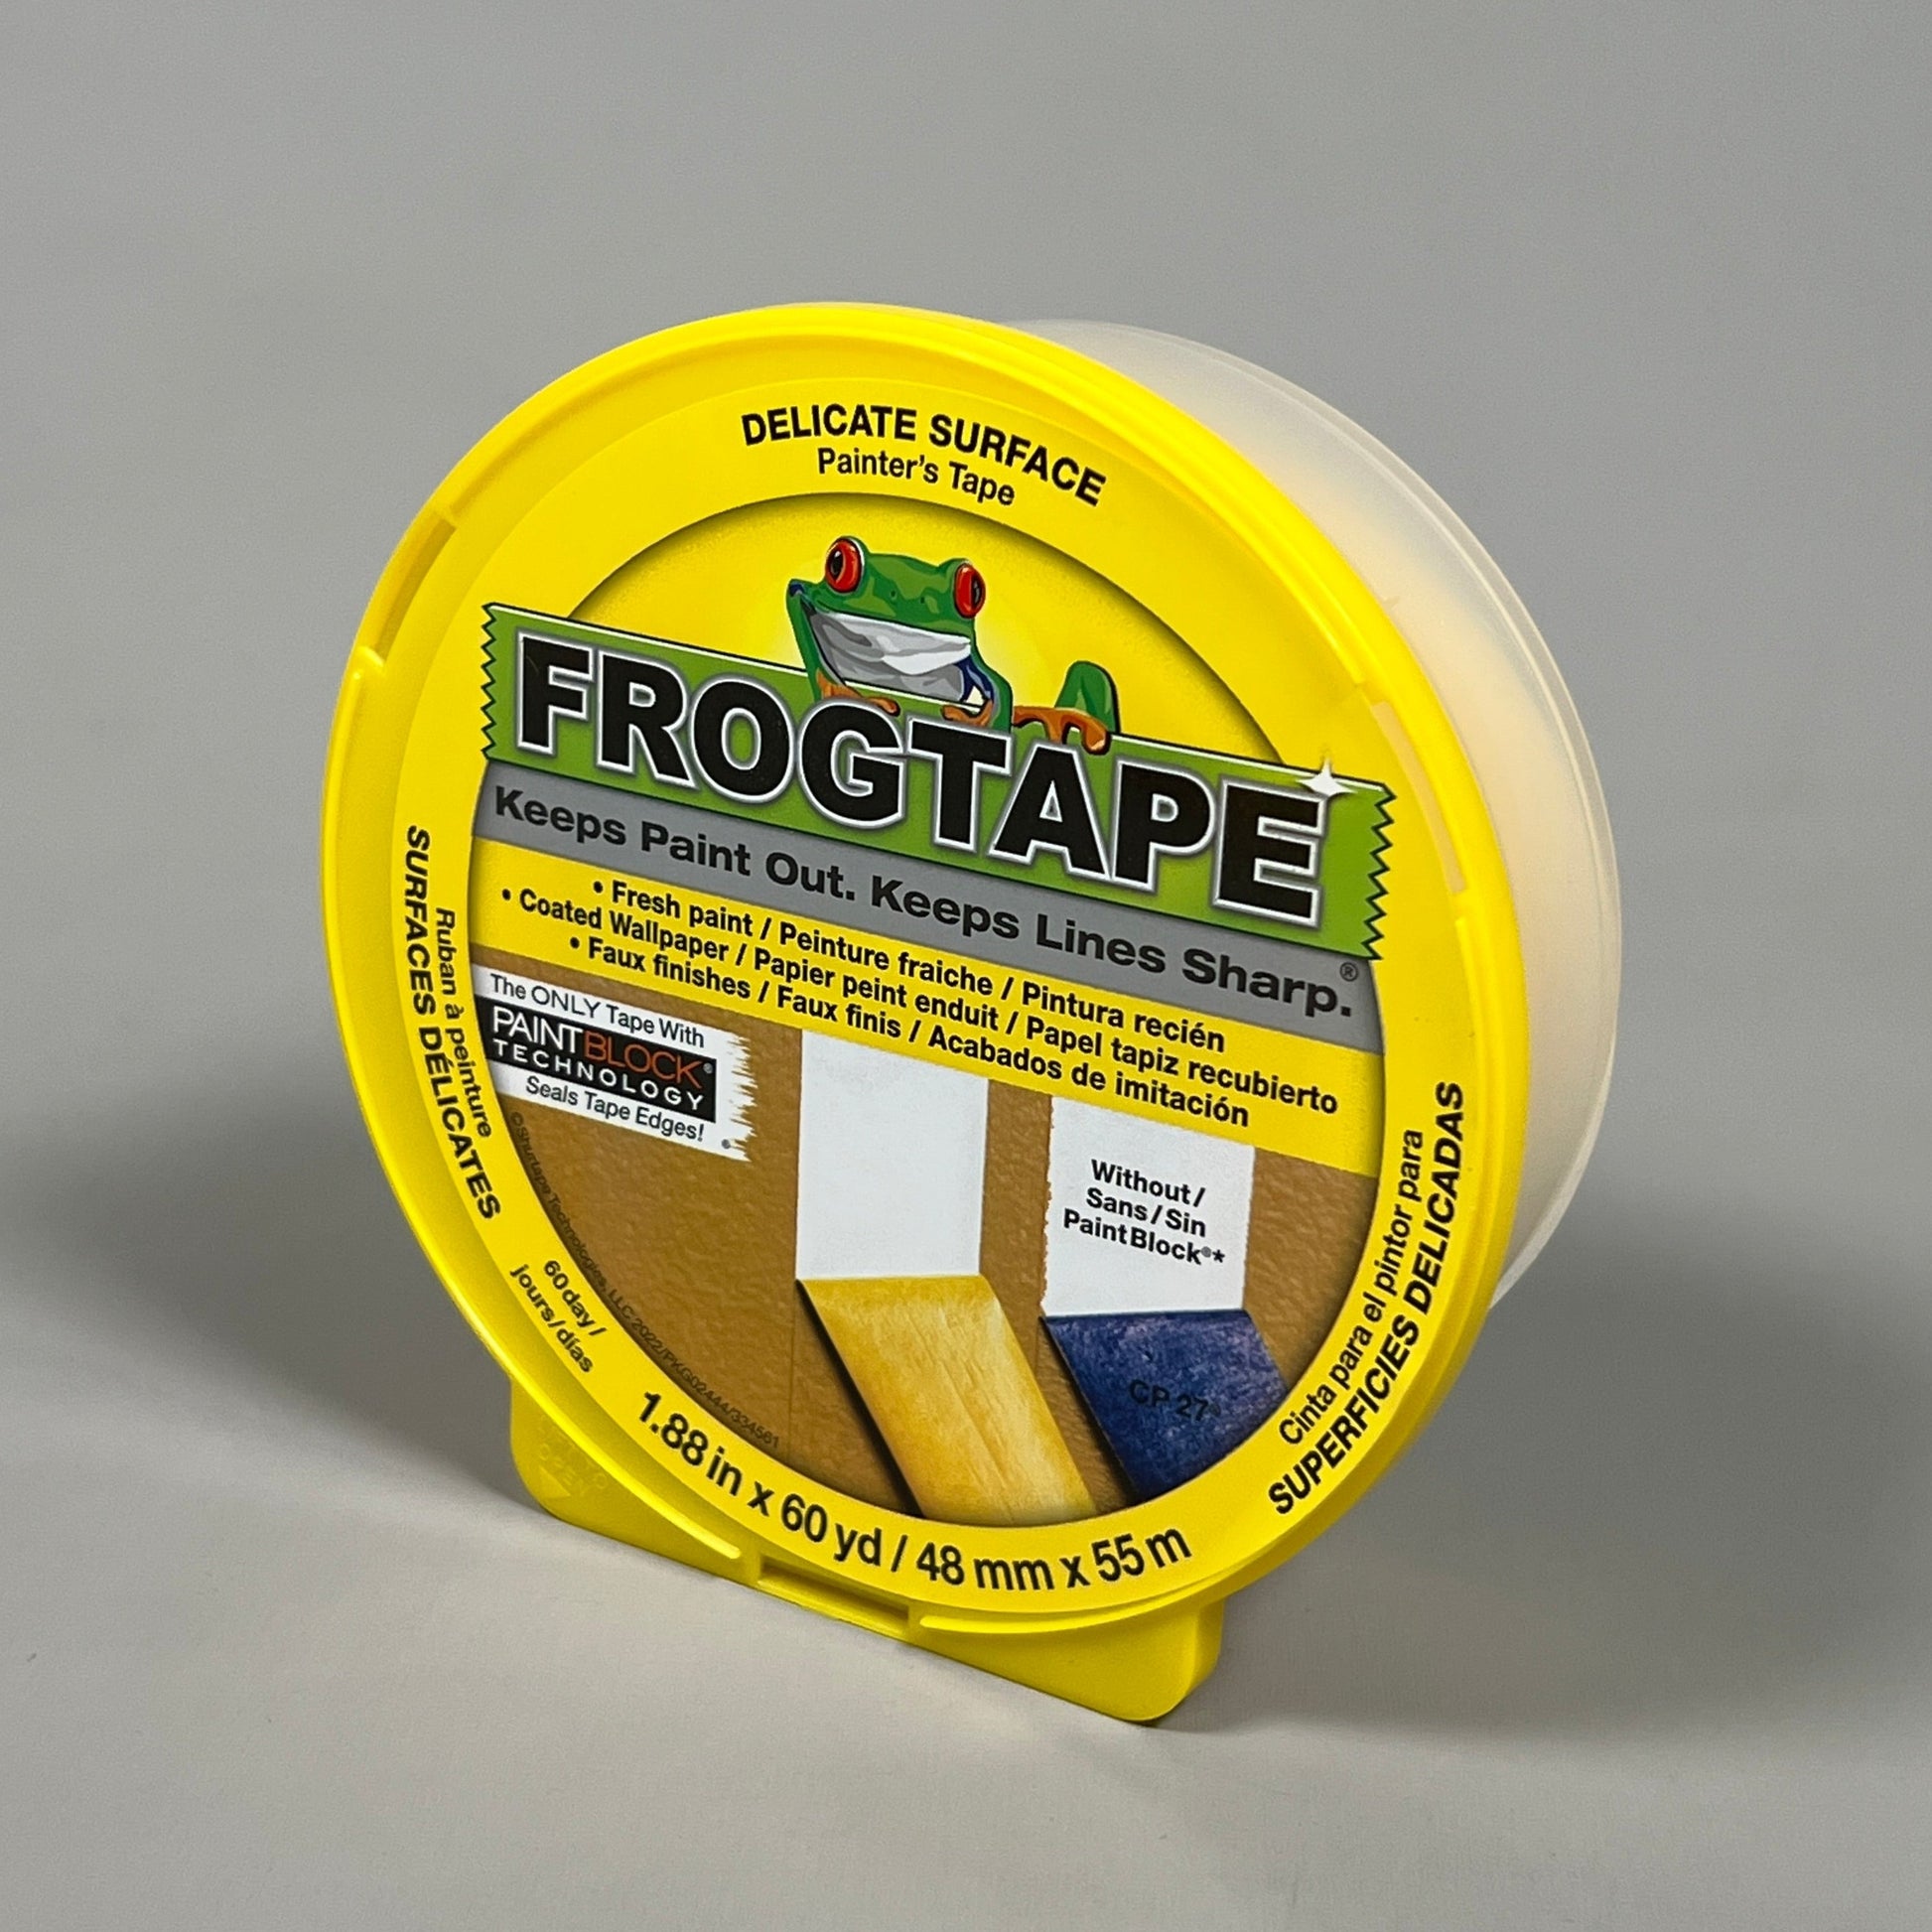 Multi-Surface 1.88 in. x 60 yds. Painter's Tape with PaintBlock